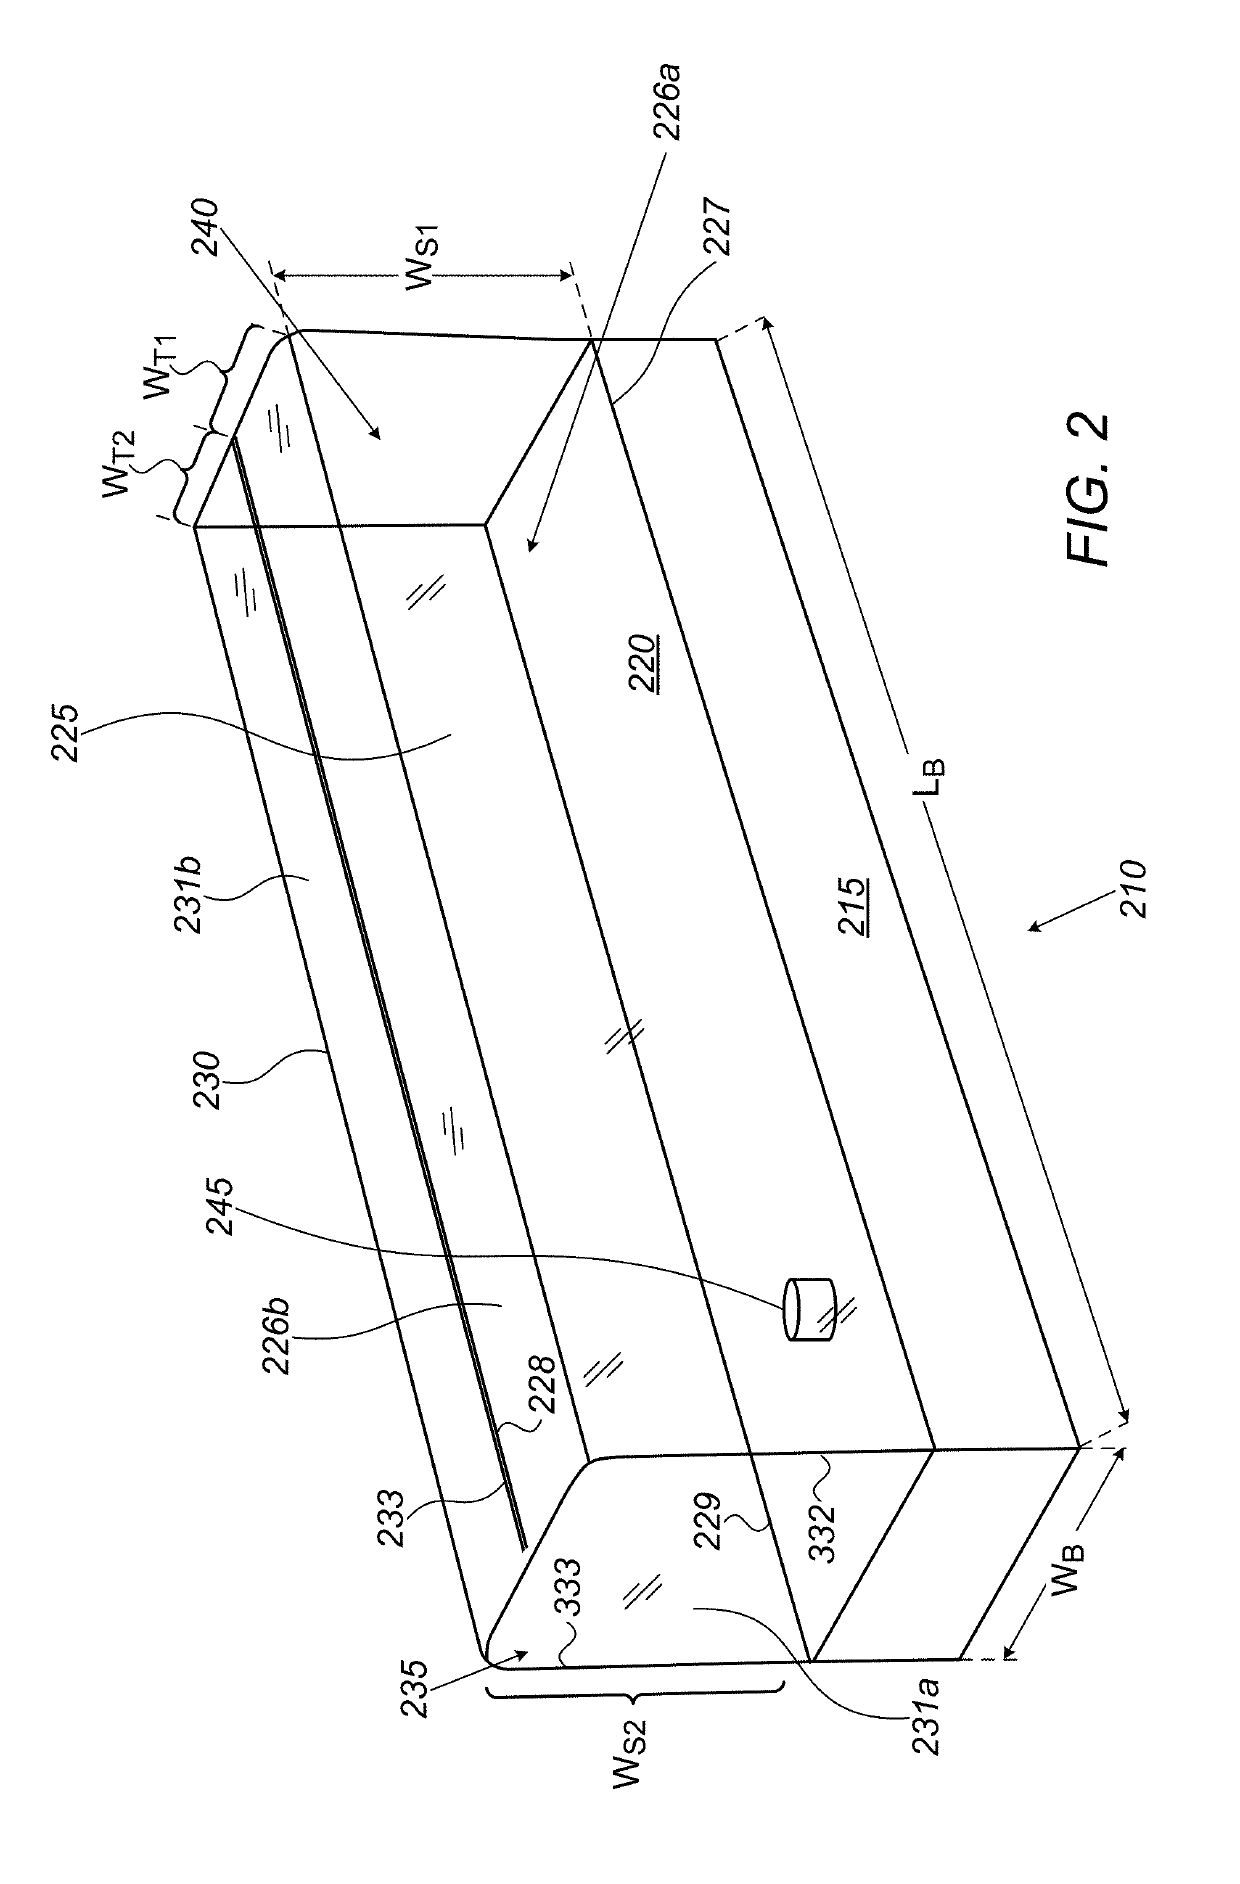 Devices and methods for a neonate incubator, capsule and cart